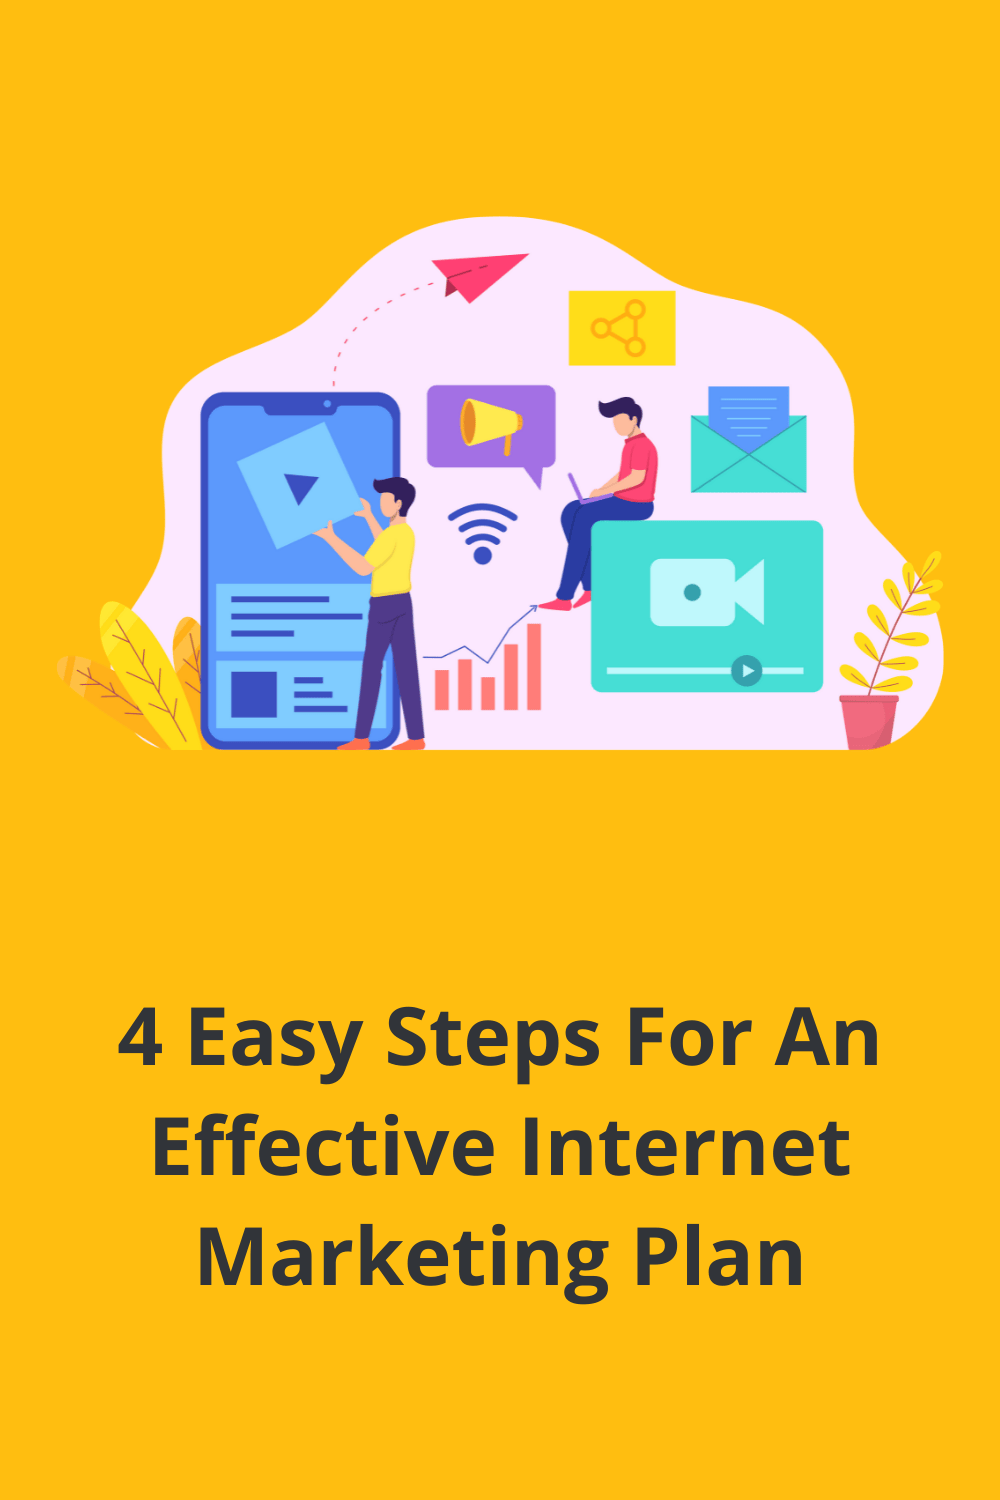 Every business is unique, so finding the right internet marketing plan should follow your enterprise needs. The steps outlined here will assist you in determining the ideal internet marketing strategy for your business. via @scopedesign